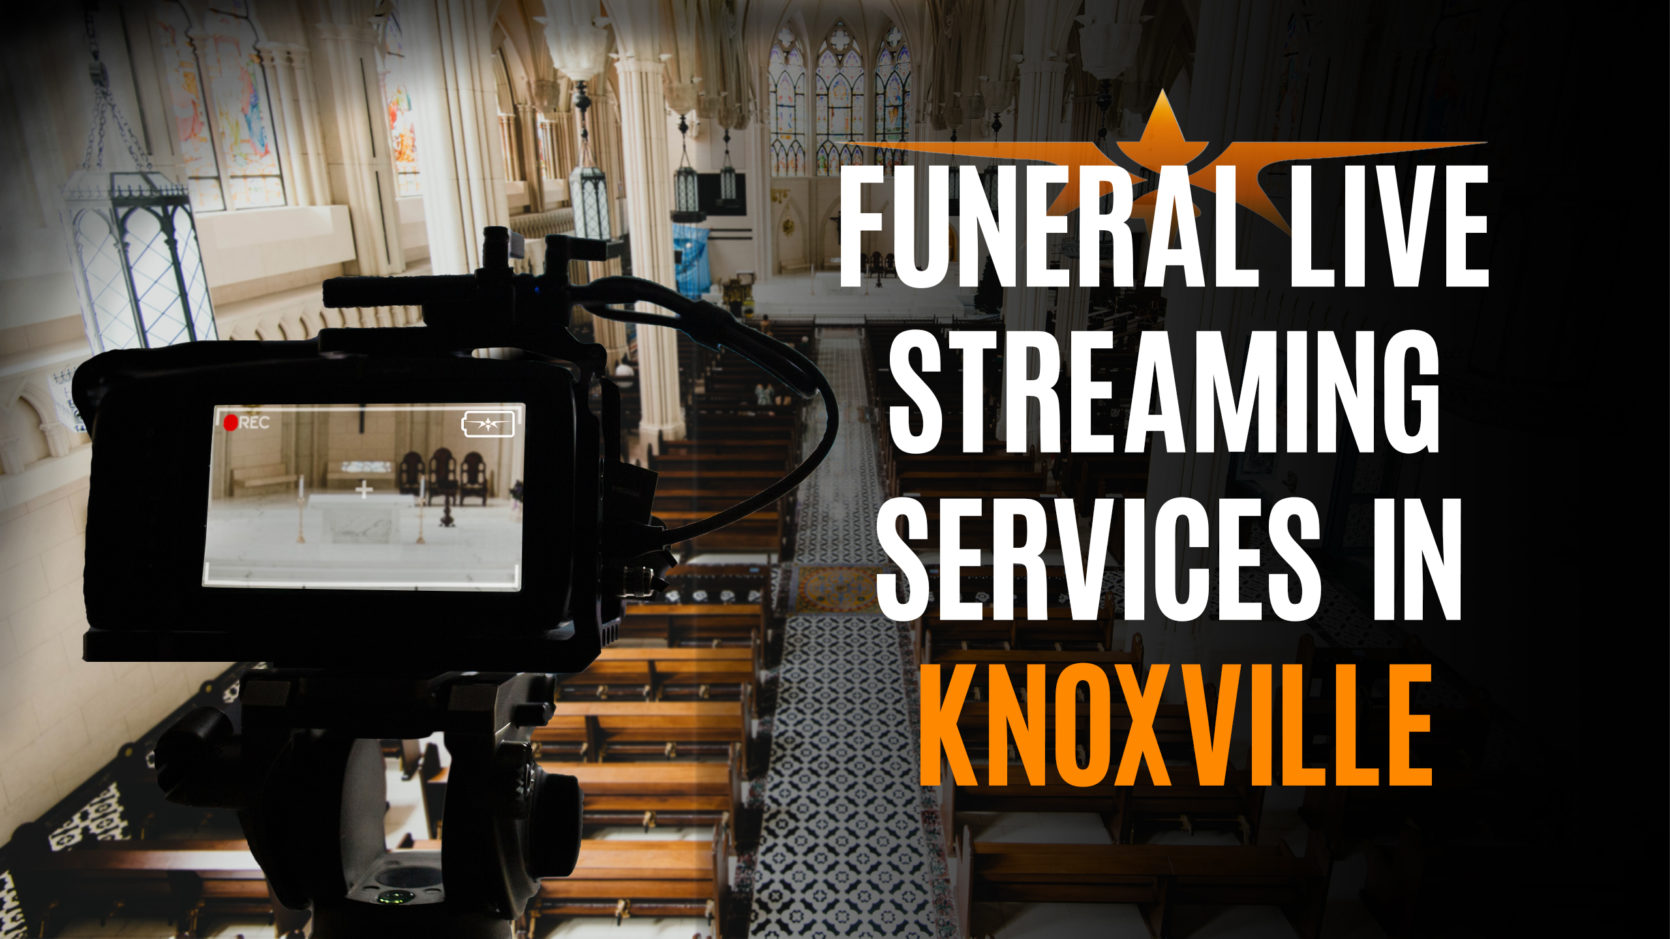 Funeral Live Streaming Services in Knoxville